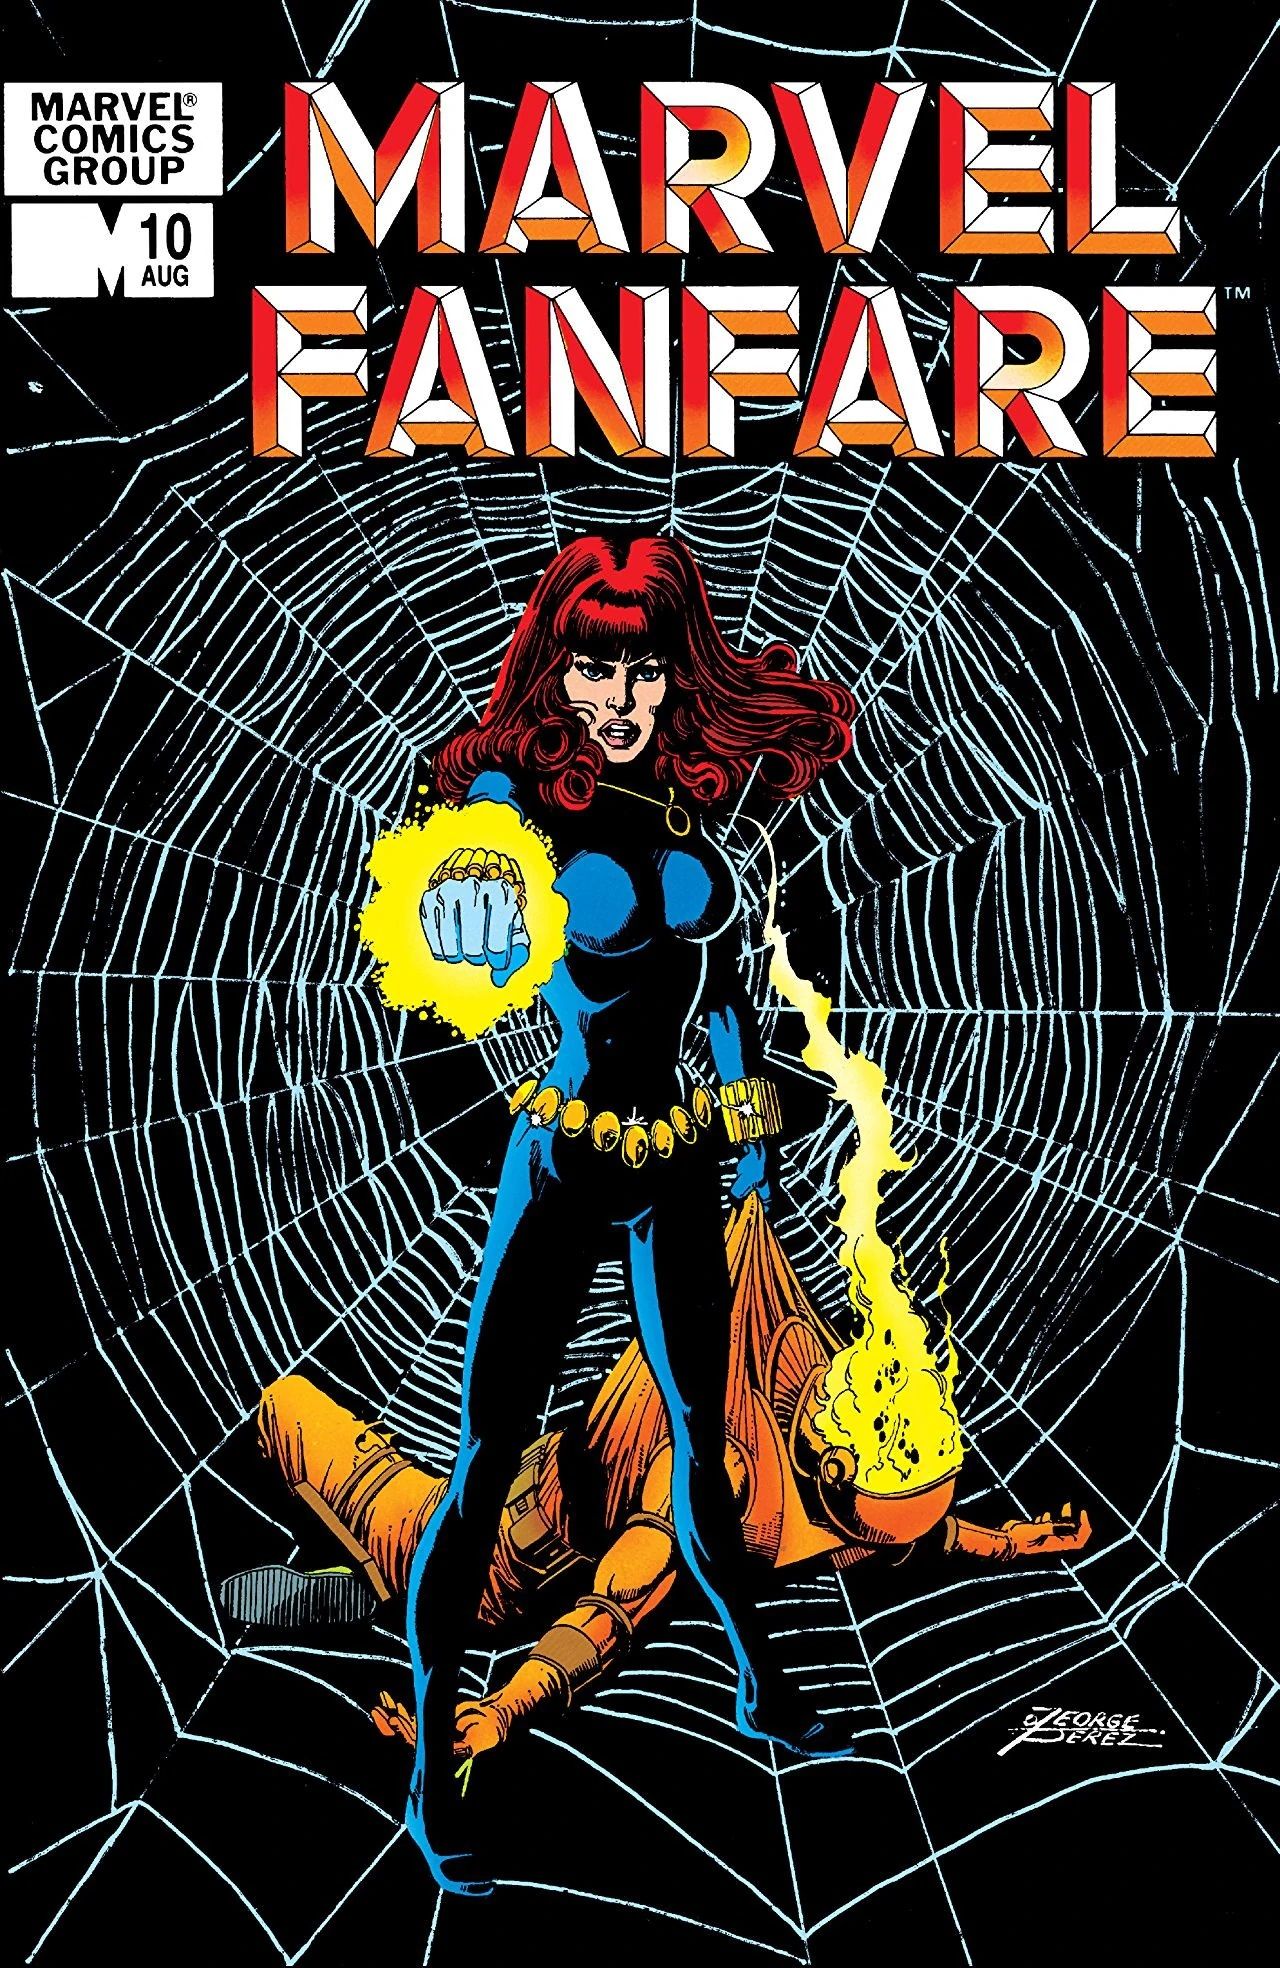 The cover of Marvel Fanfare #10